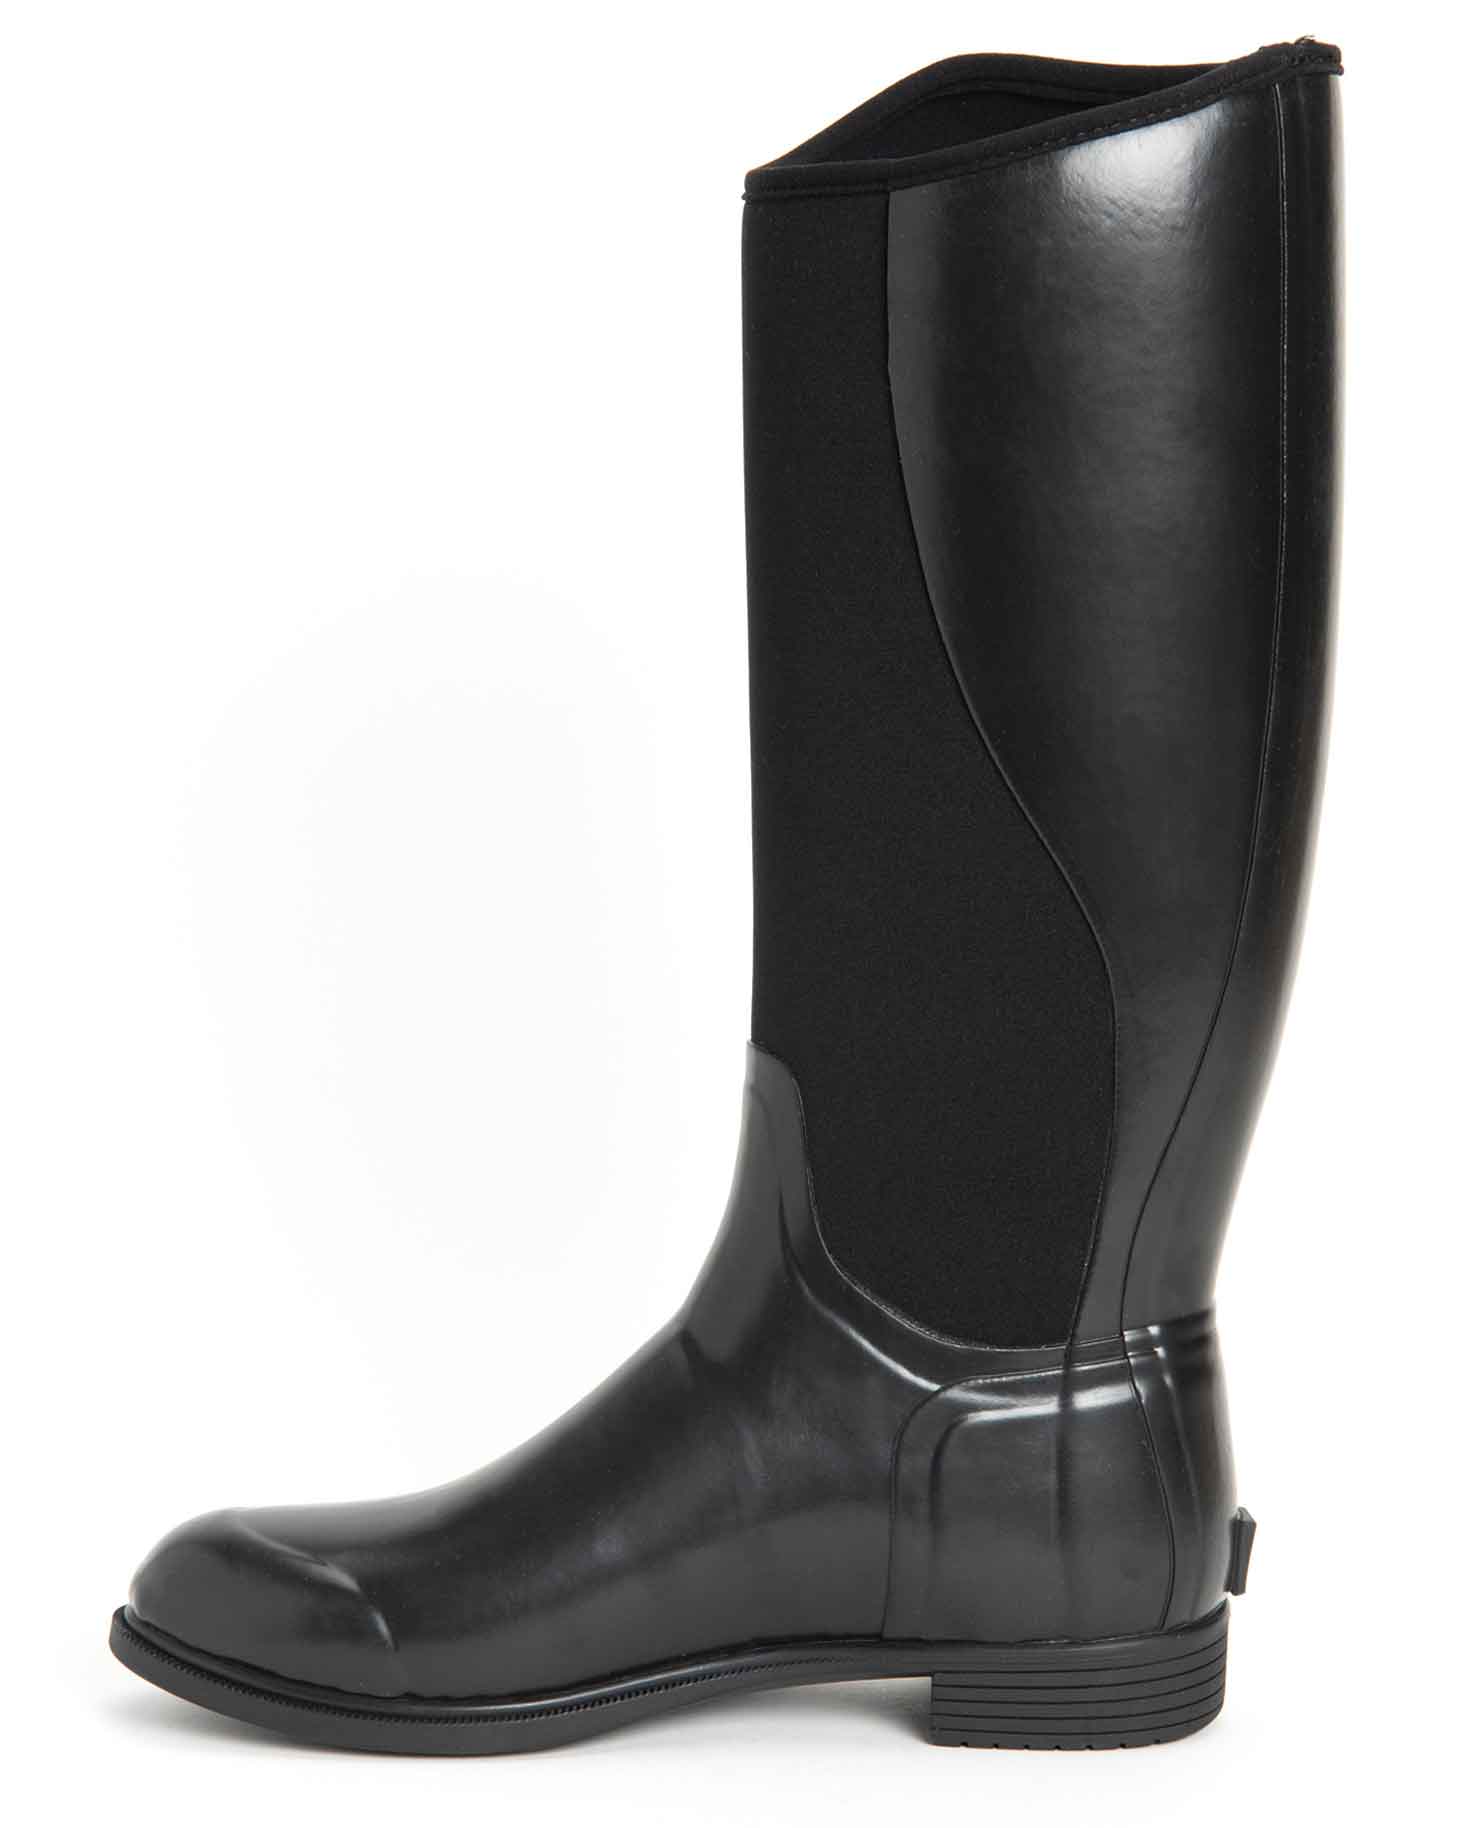 Derby Equestrian Tall Gumboots